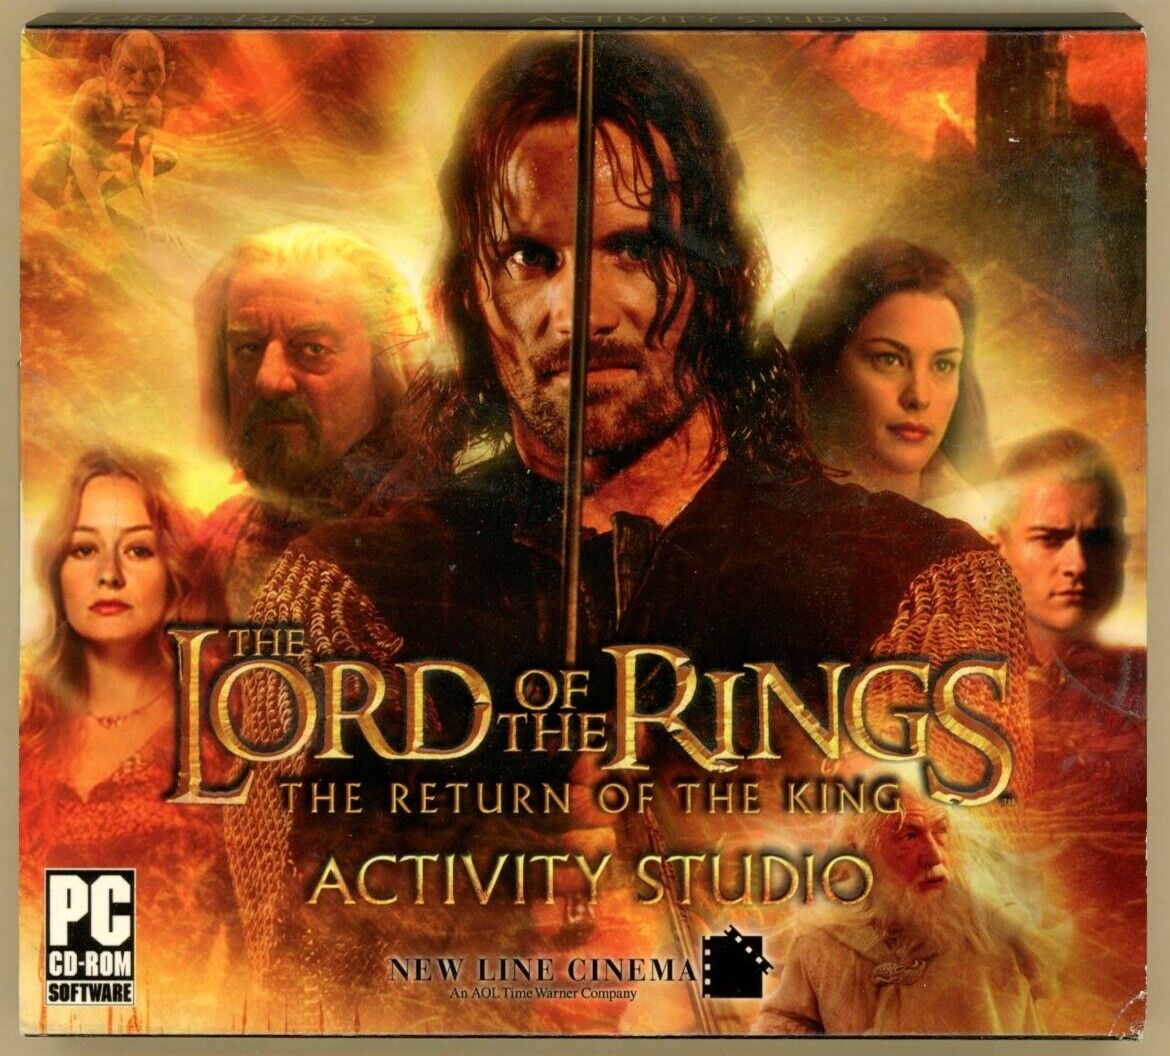 The Lord of the Rings: The Return of the King - New Activity Studio CD-ROM   